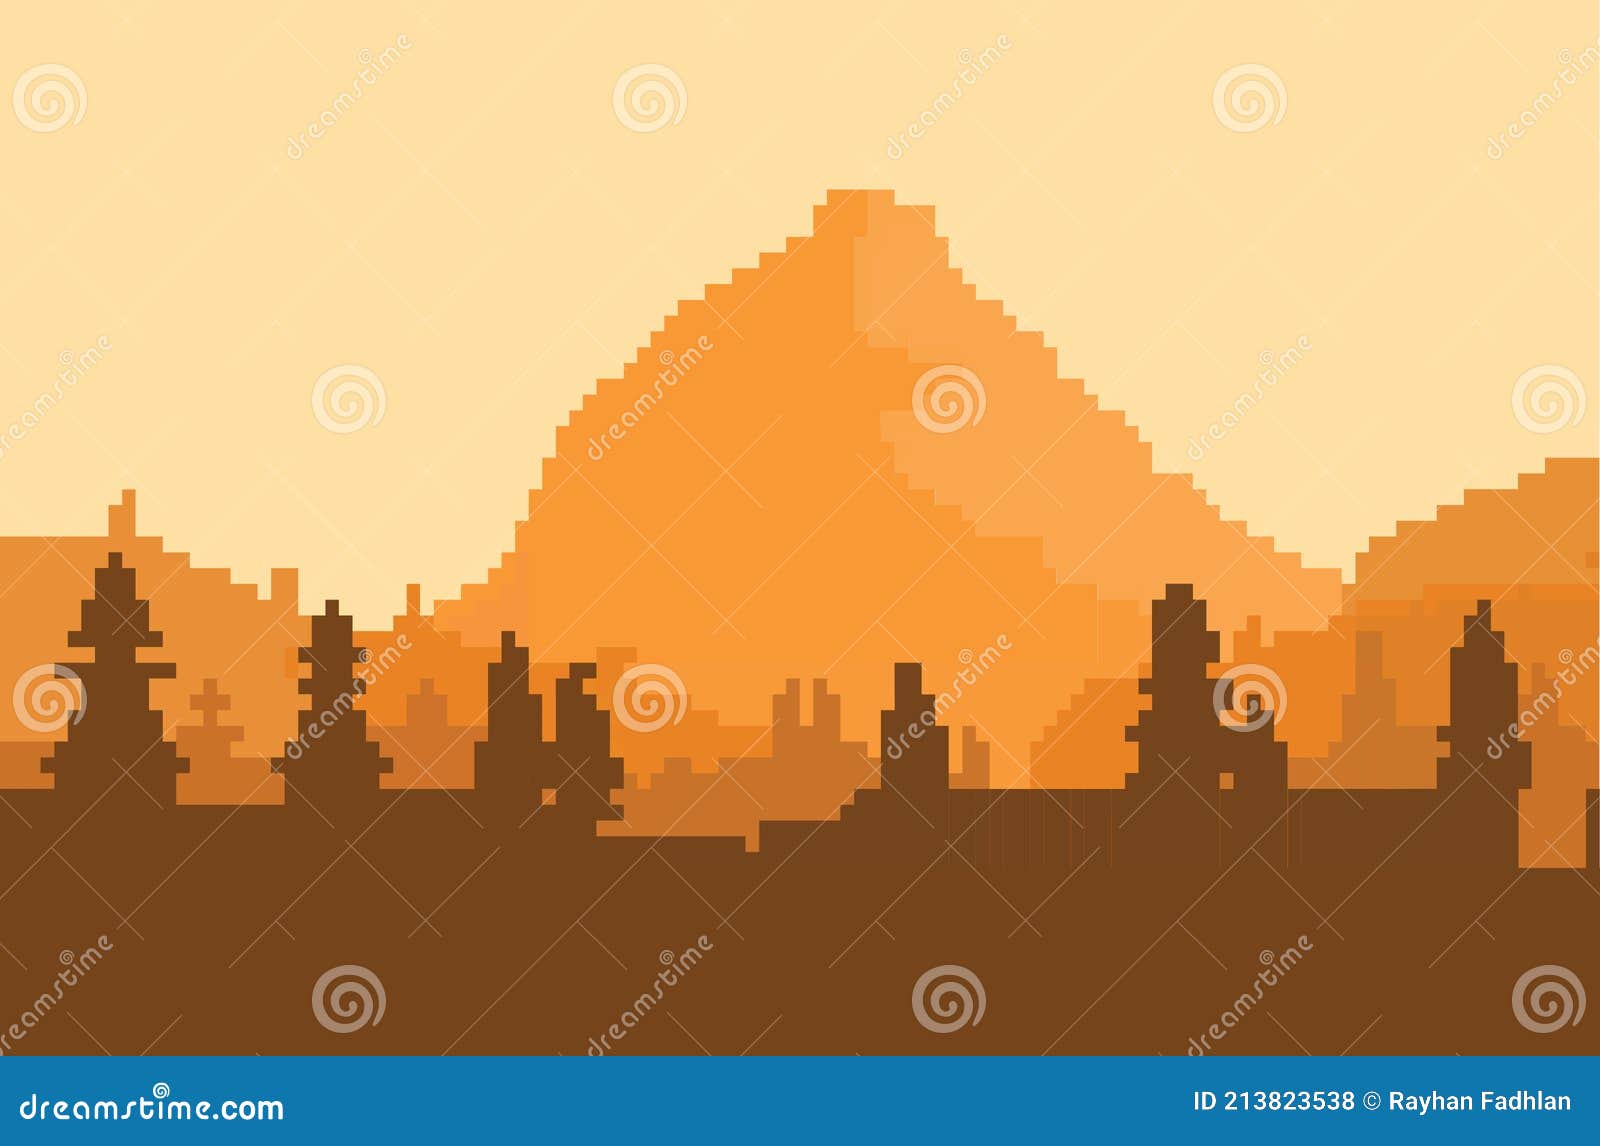 8 Bit Pixel Art Background with Mountains Surrounded by Trees Stock Vector  - Illustration of color, farming: 213823538